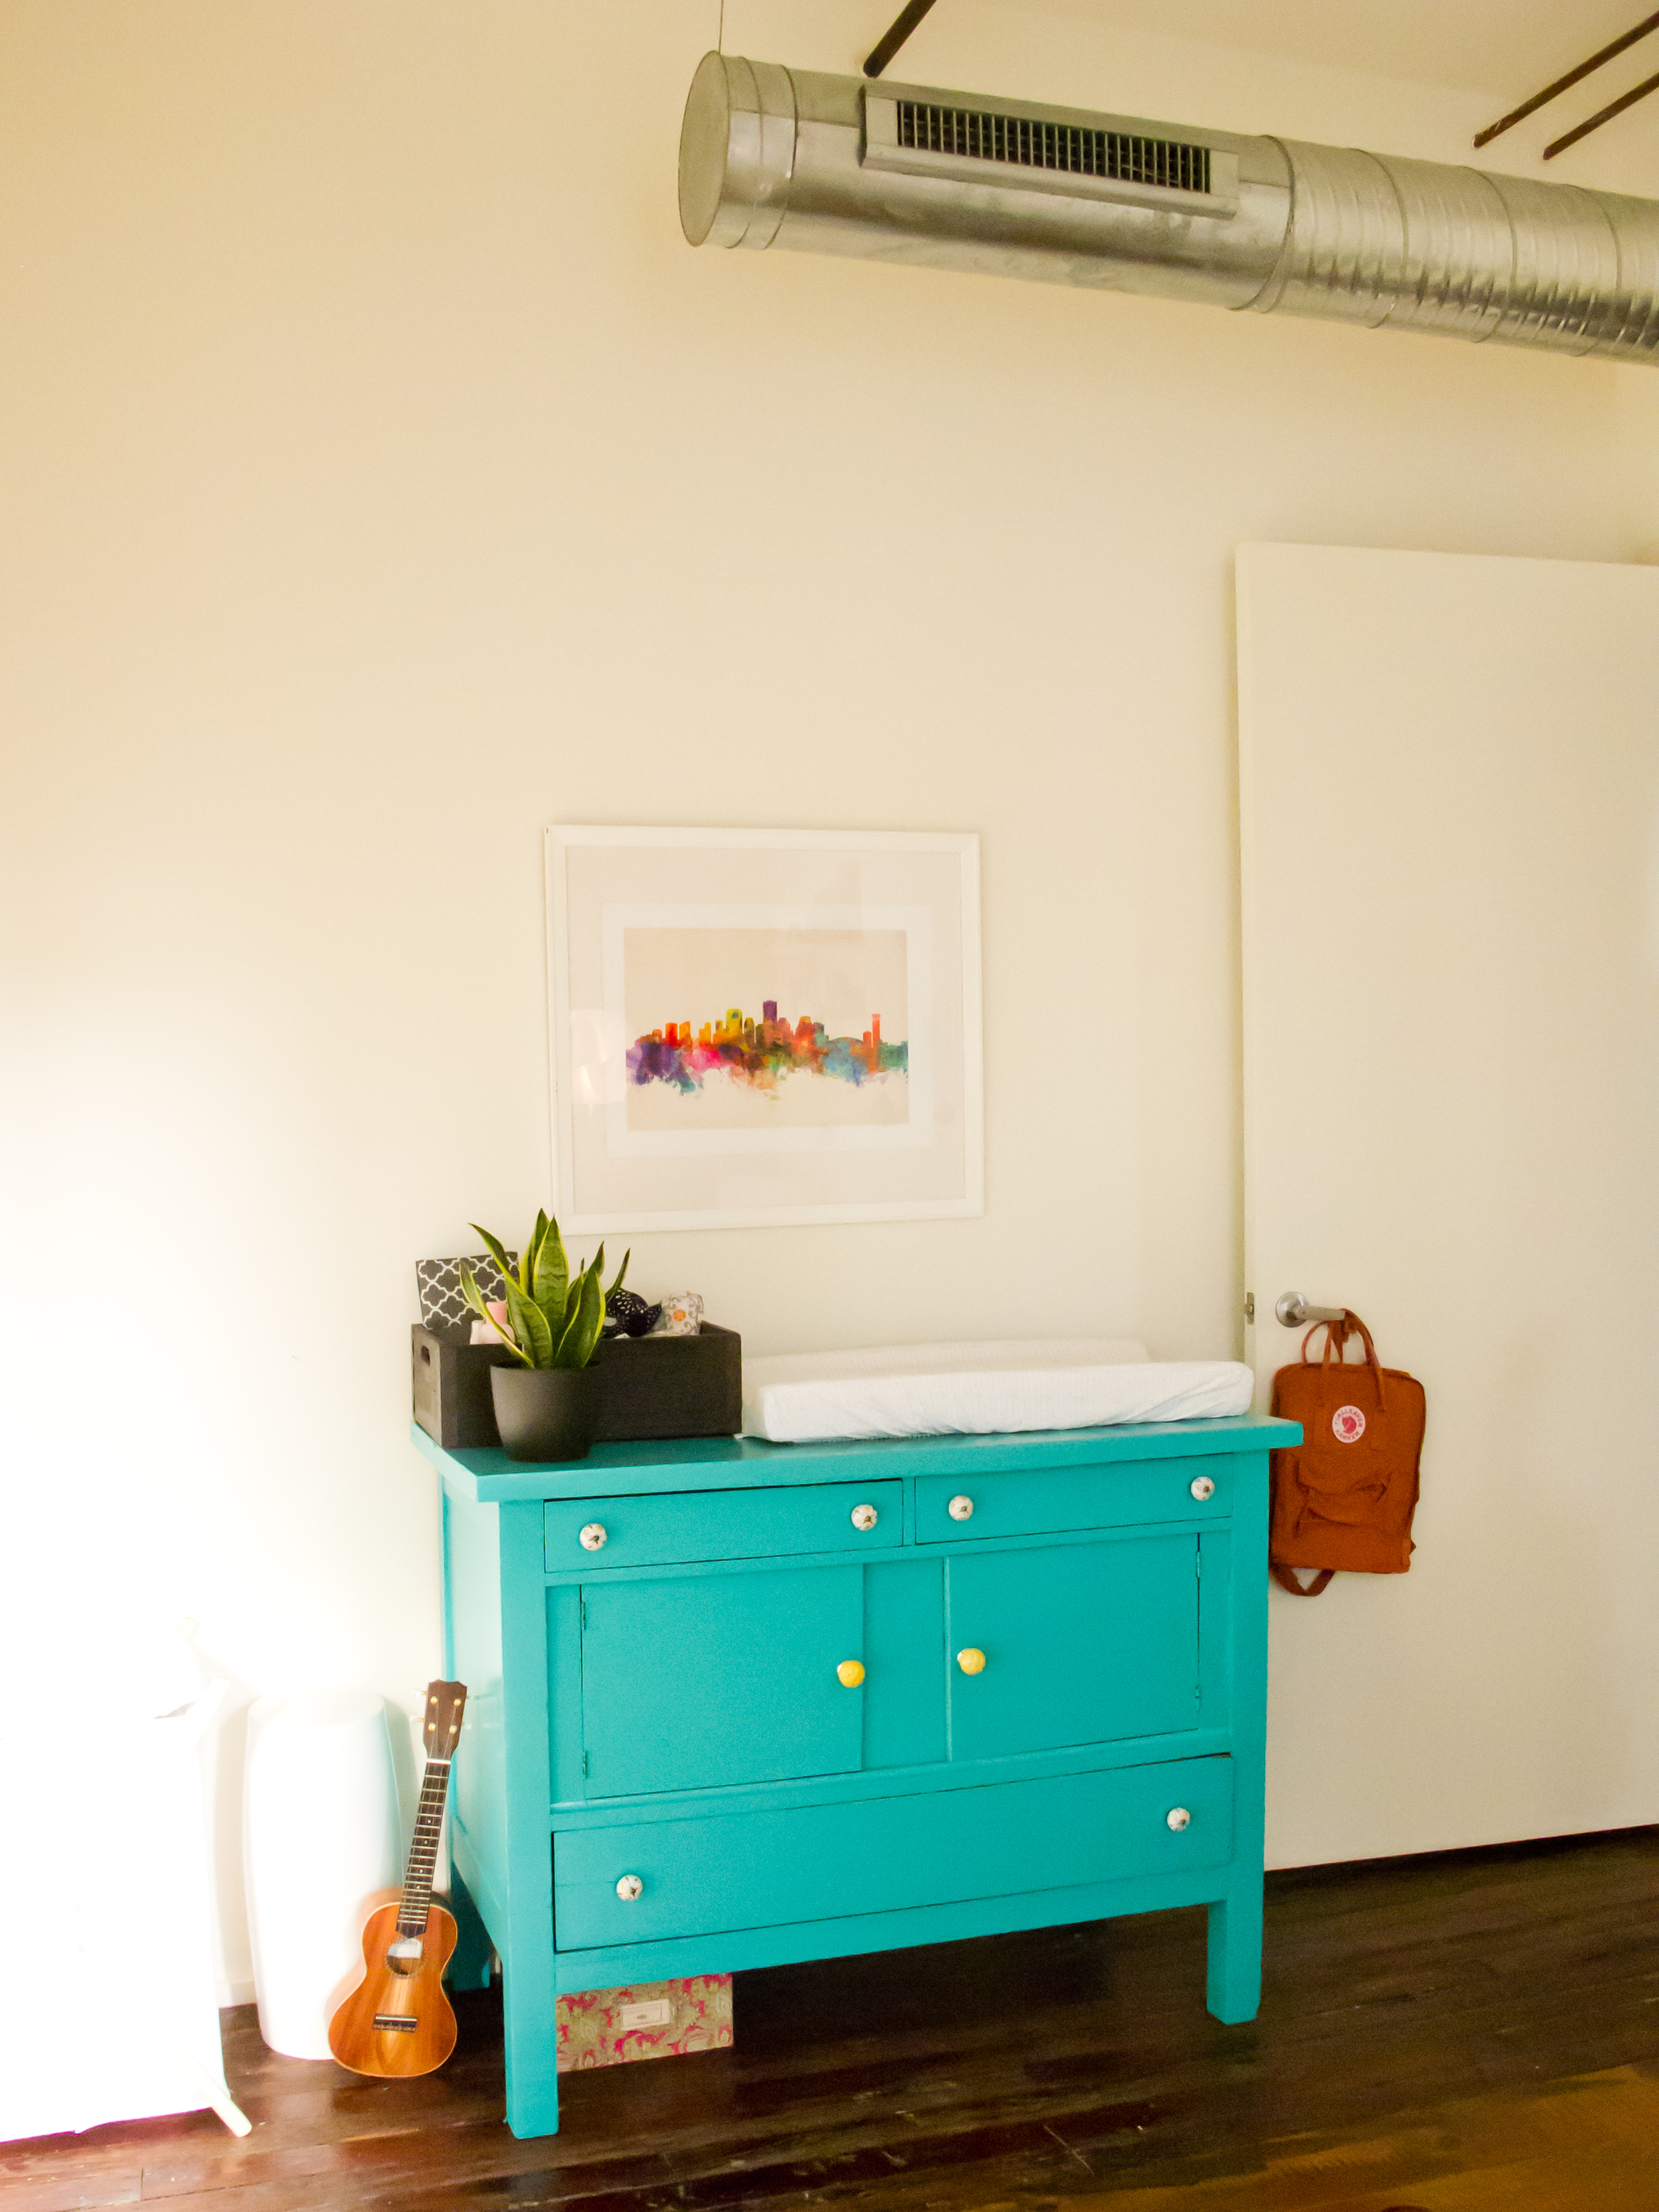 Teal Changing Table in this Bright, Colorful Nursery